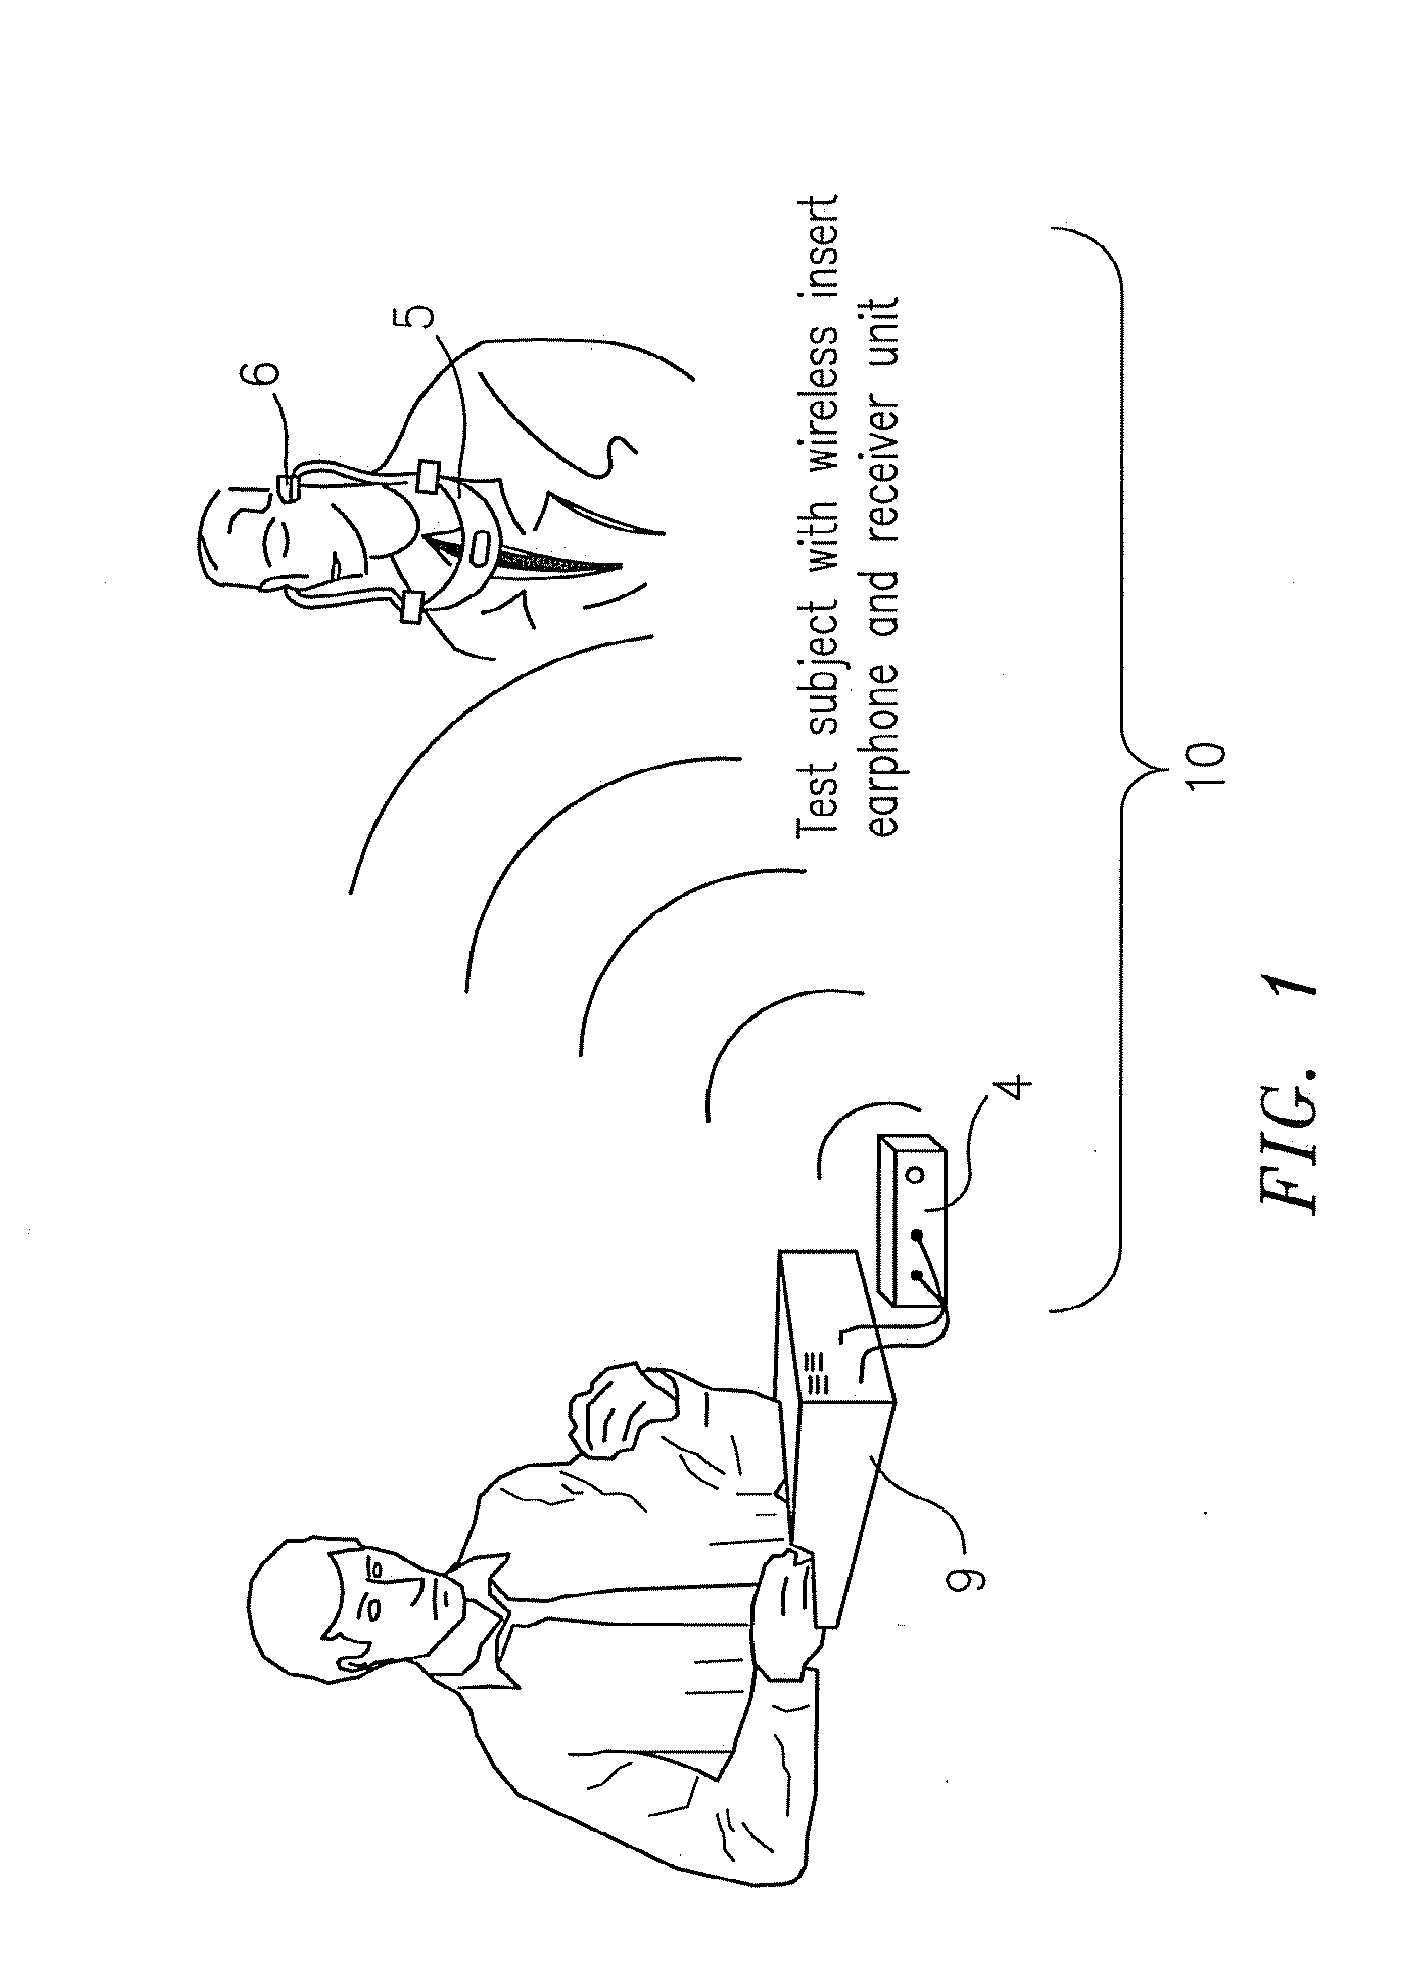 Wireless interface for audiometers